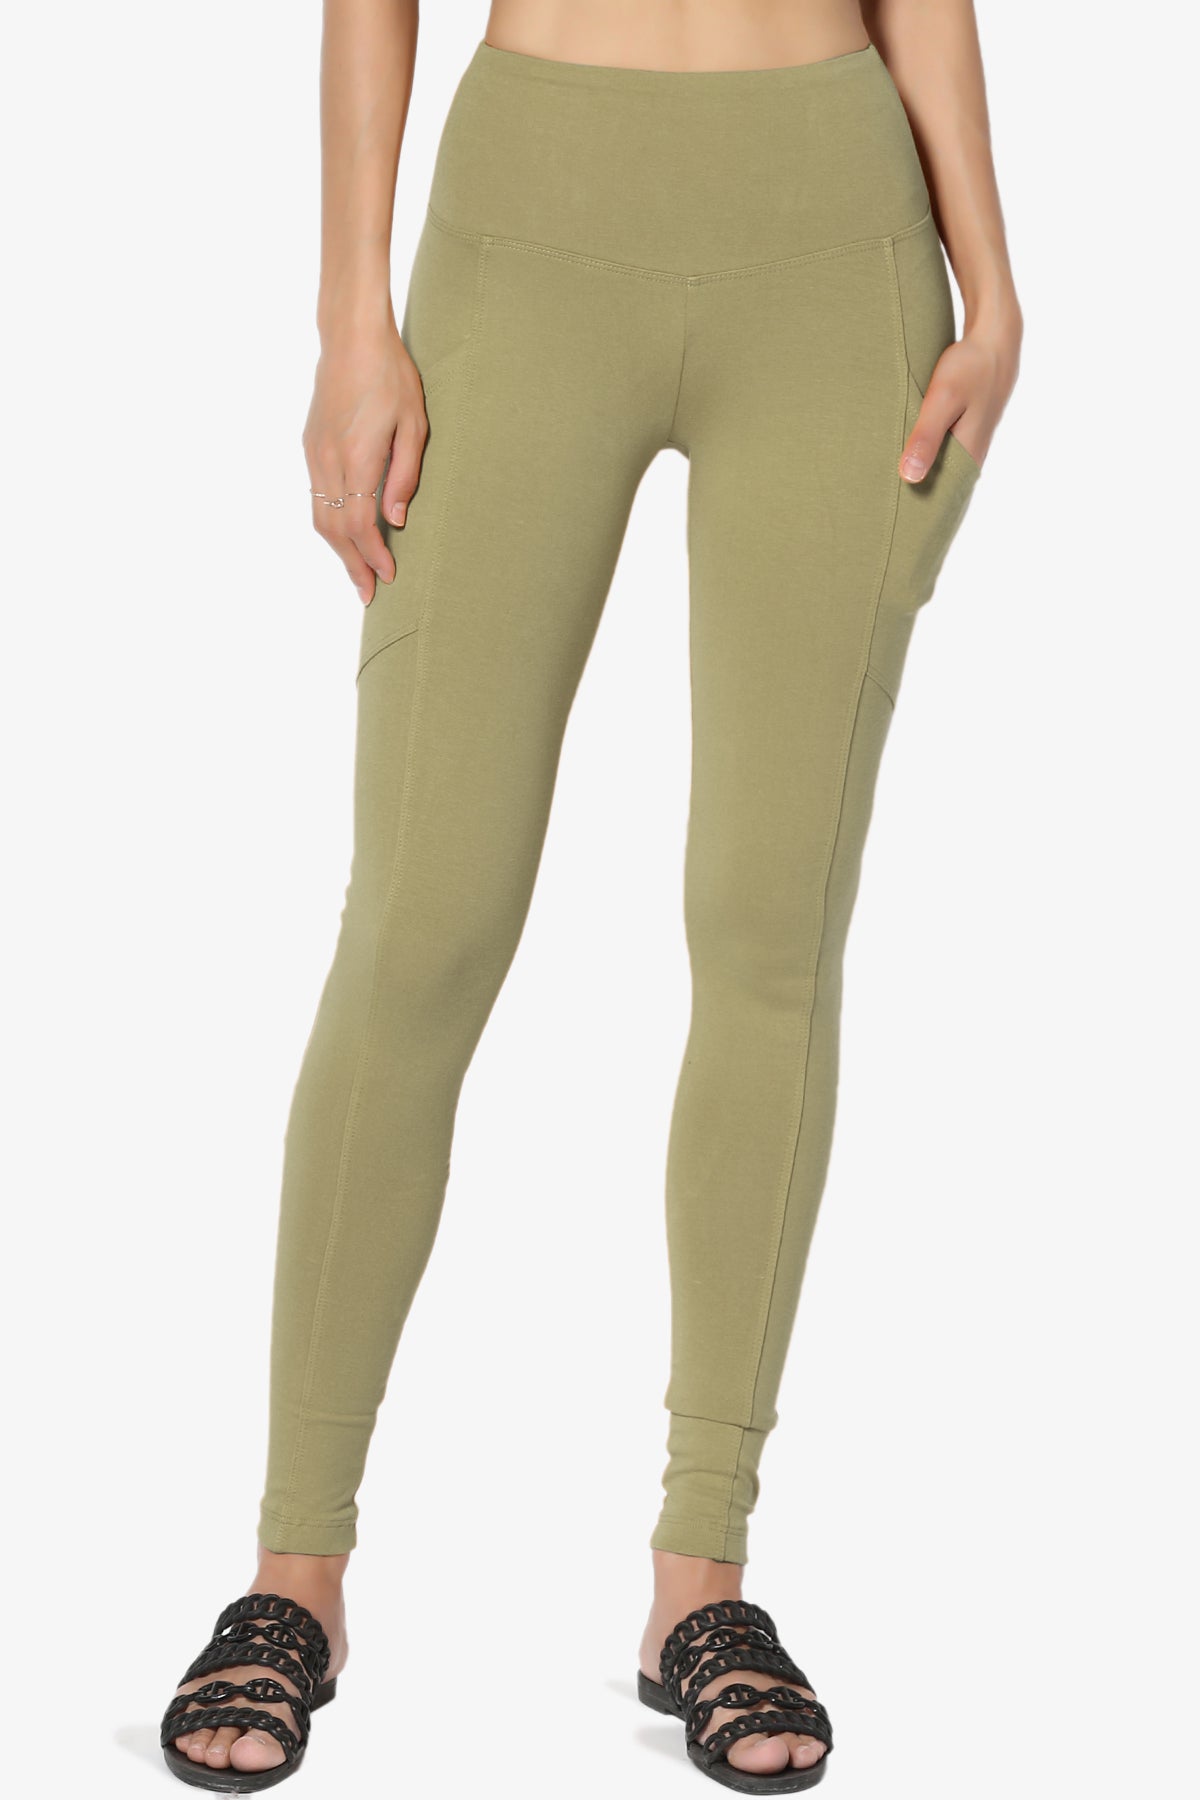 Ansley Luxe Cotton Leggings with Pockets KHAKI GREEN_3